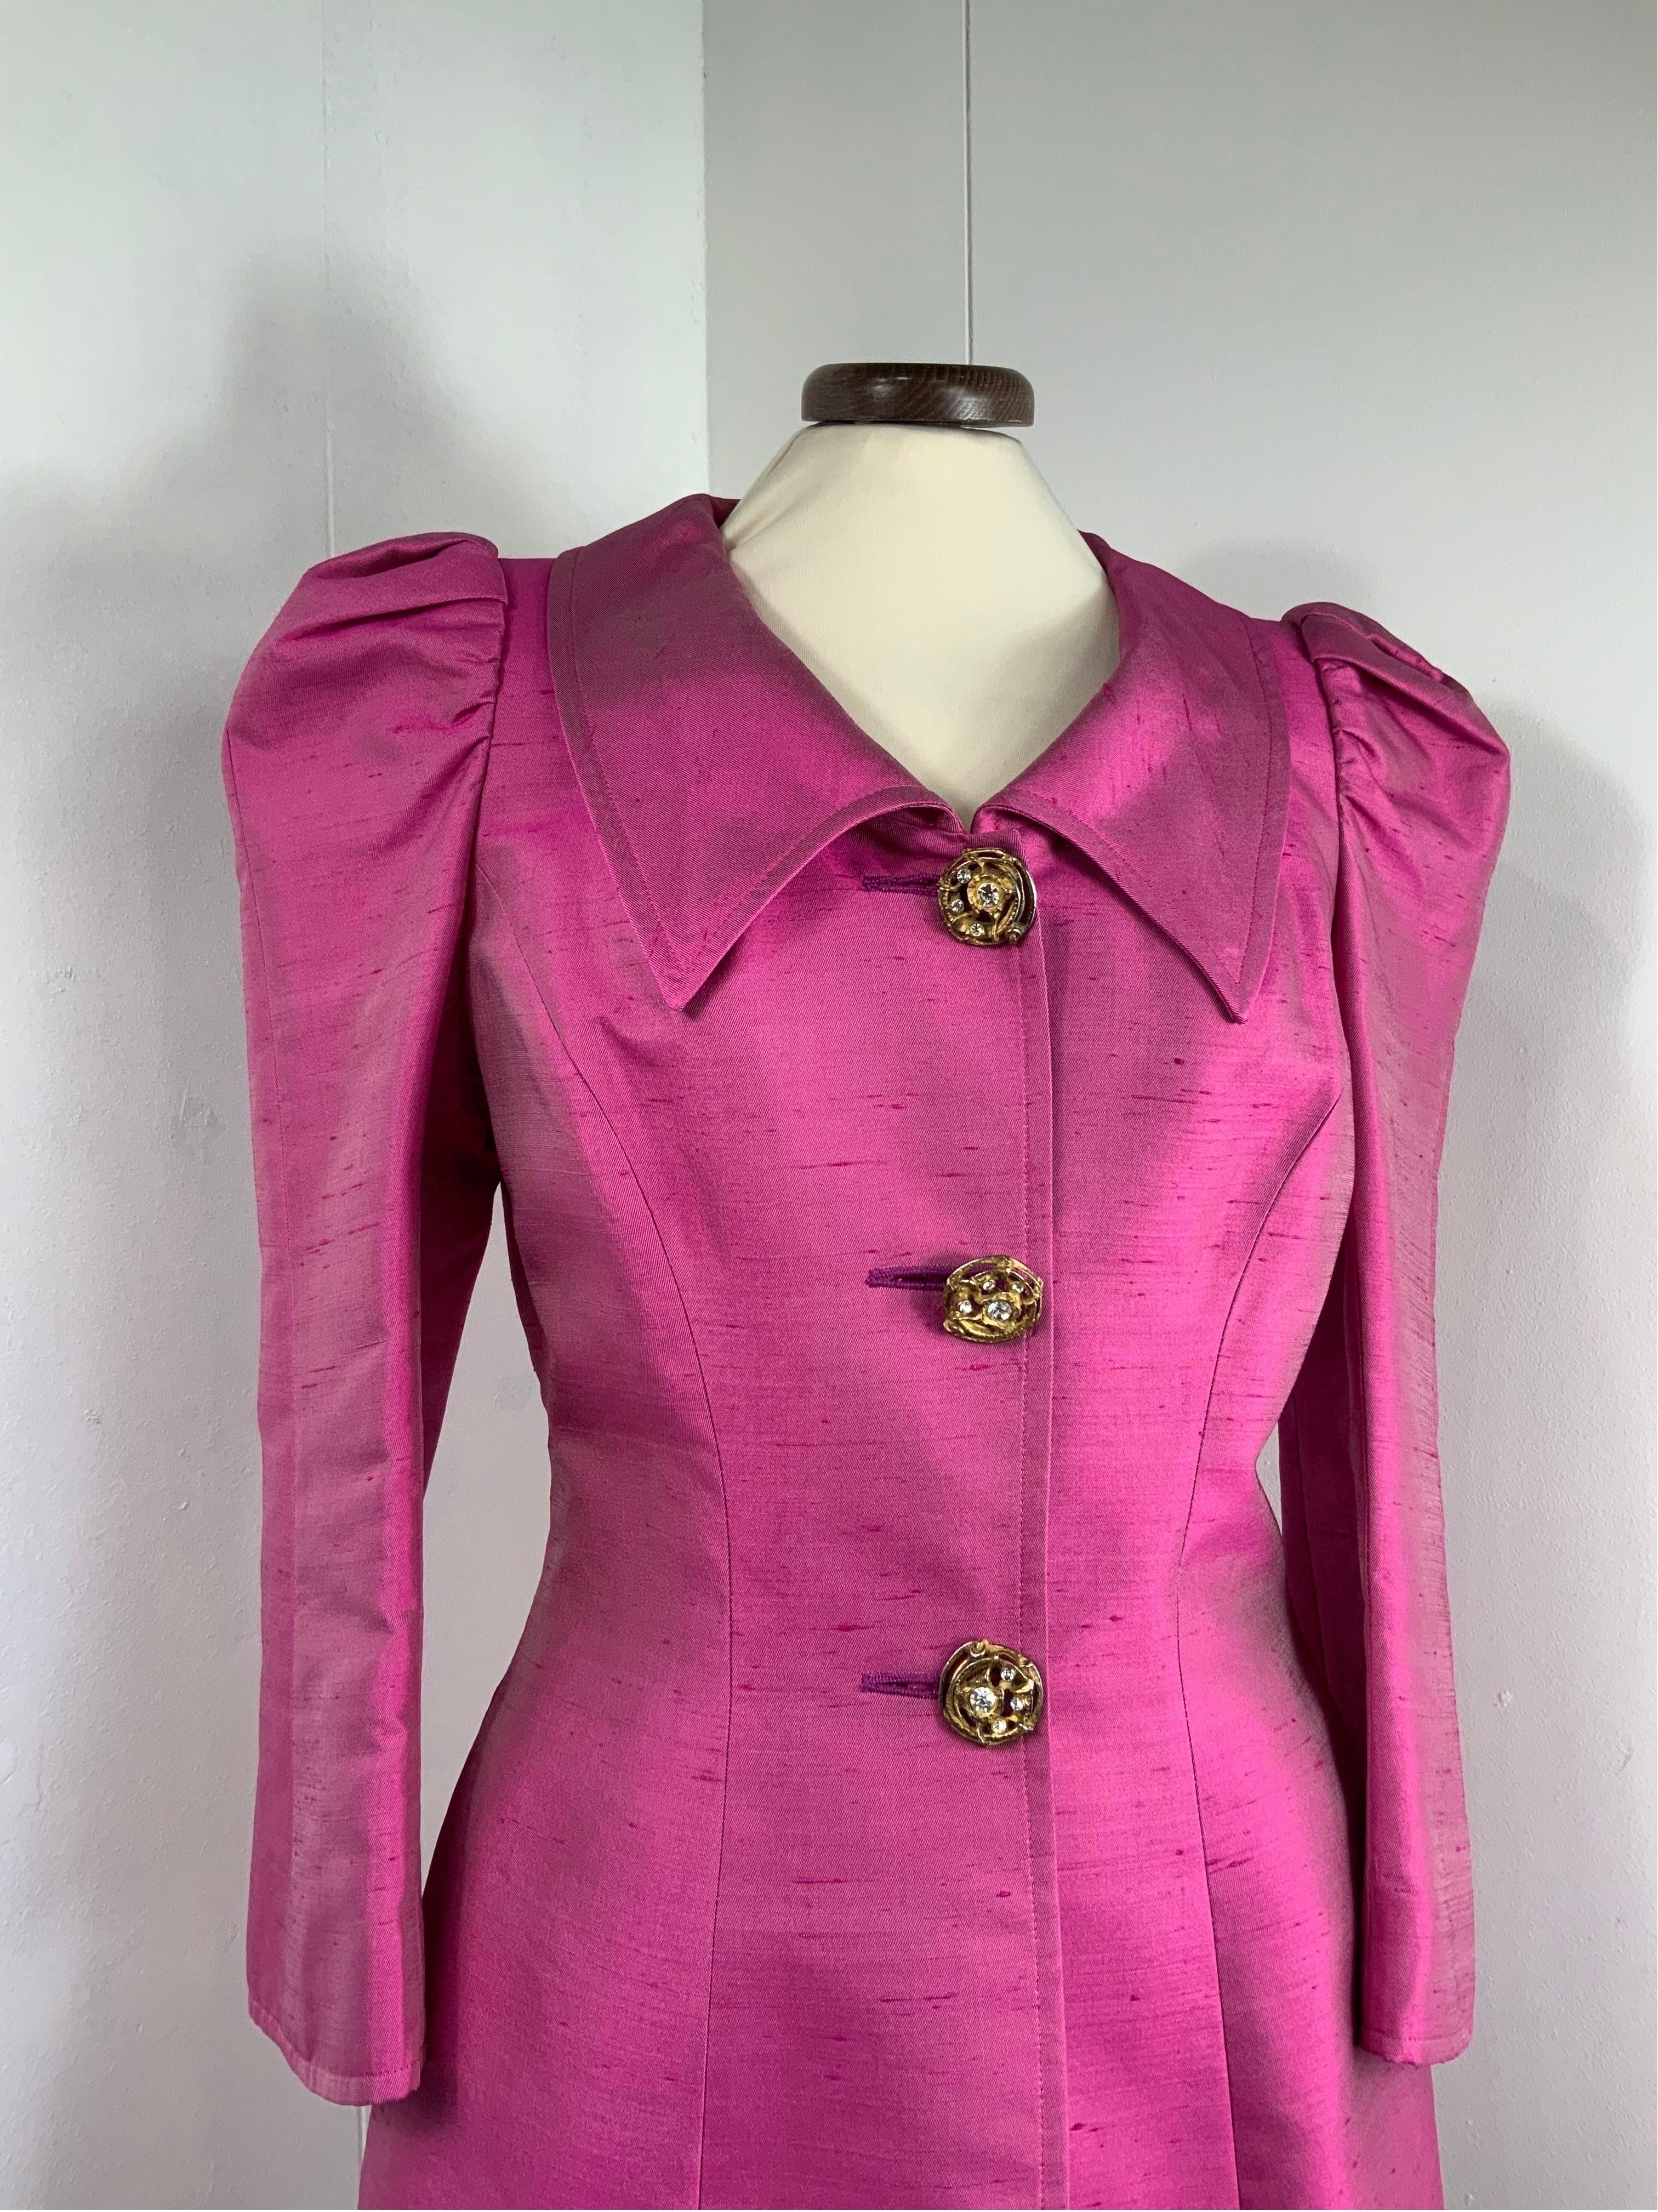 Christian Lacroix suit. Vintage piece.
Jacket + skirt.
100% silk. Fully lined.
Featuring jewelry buttons and puffed sleeves.
Size 40 Italian.
Shoulders 48 cm
Bust 42 cm
Length 75 cm
Sleeves 55 cm
Skirt features lateral zip closure.
Waist 33